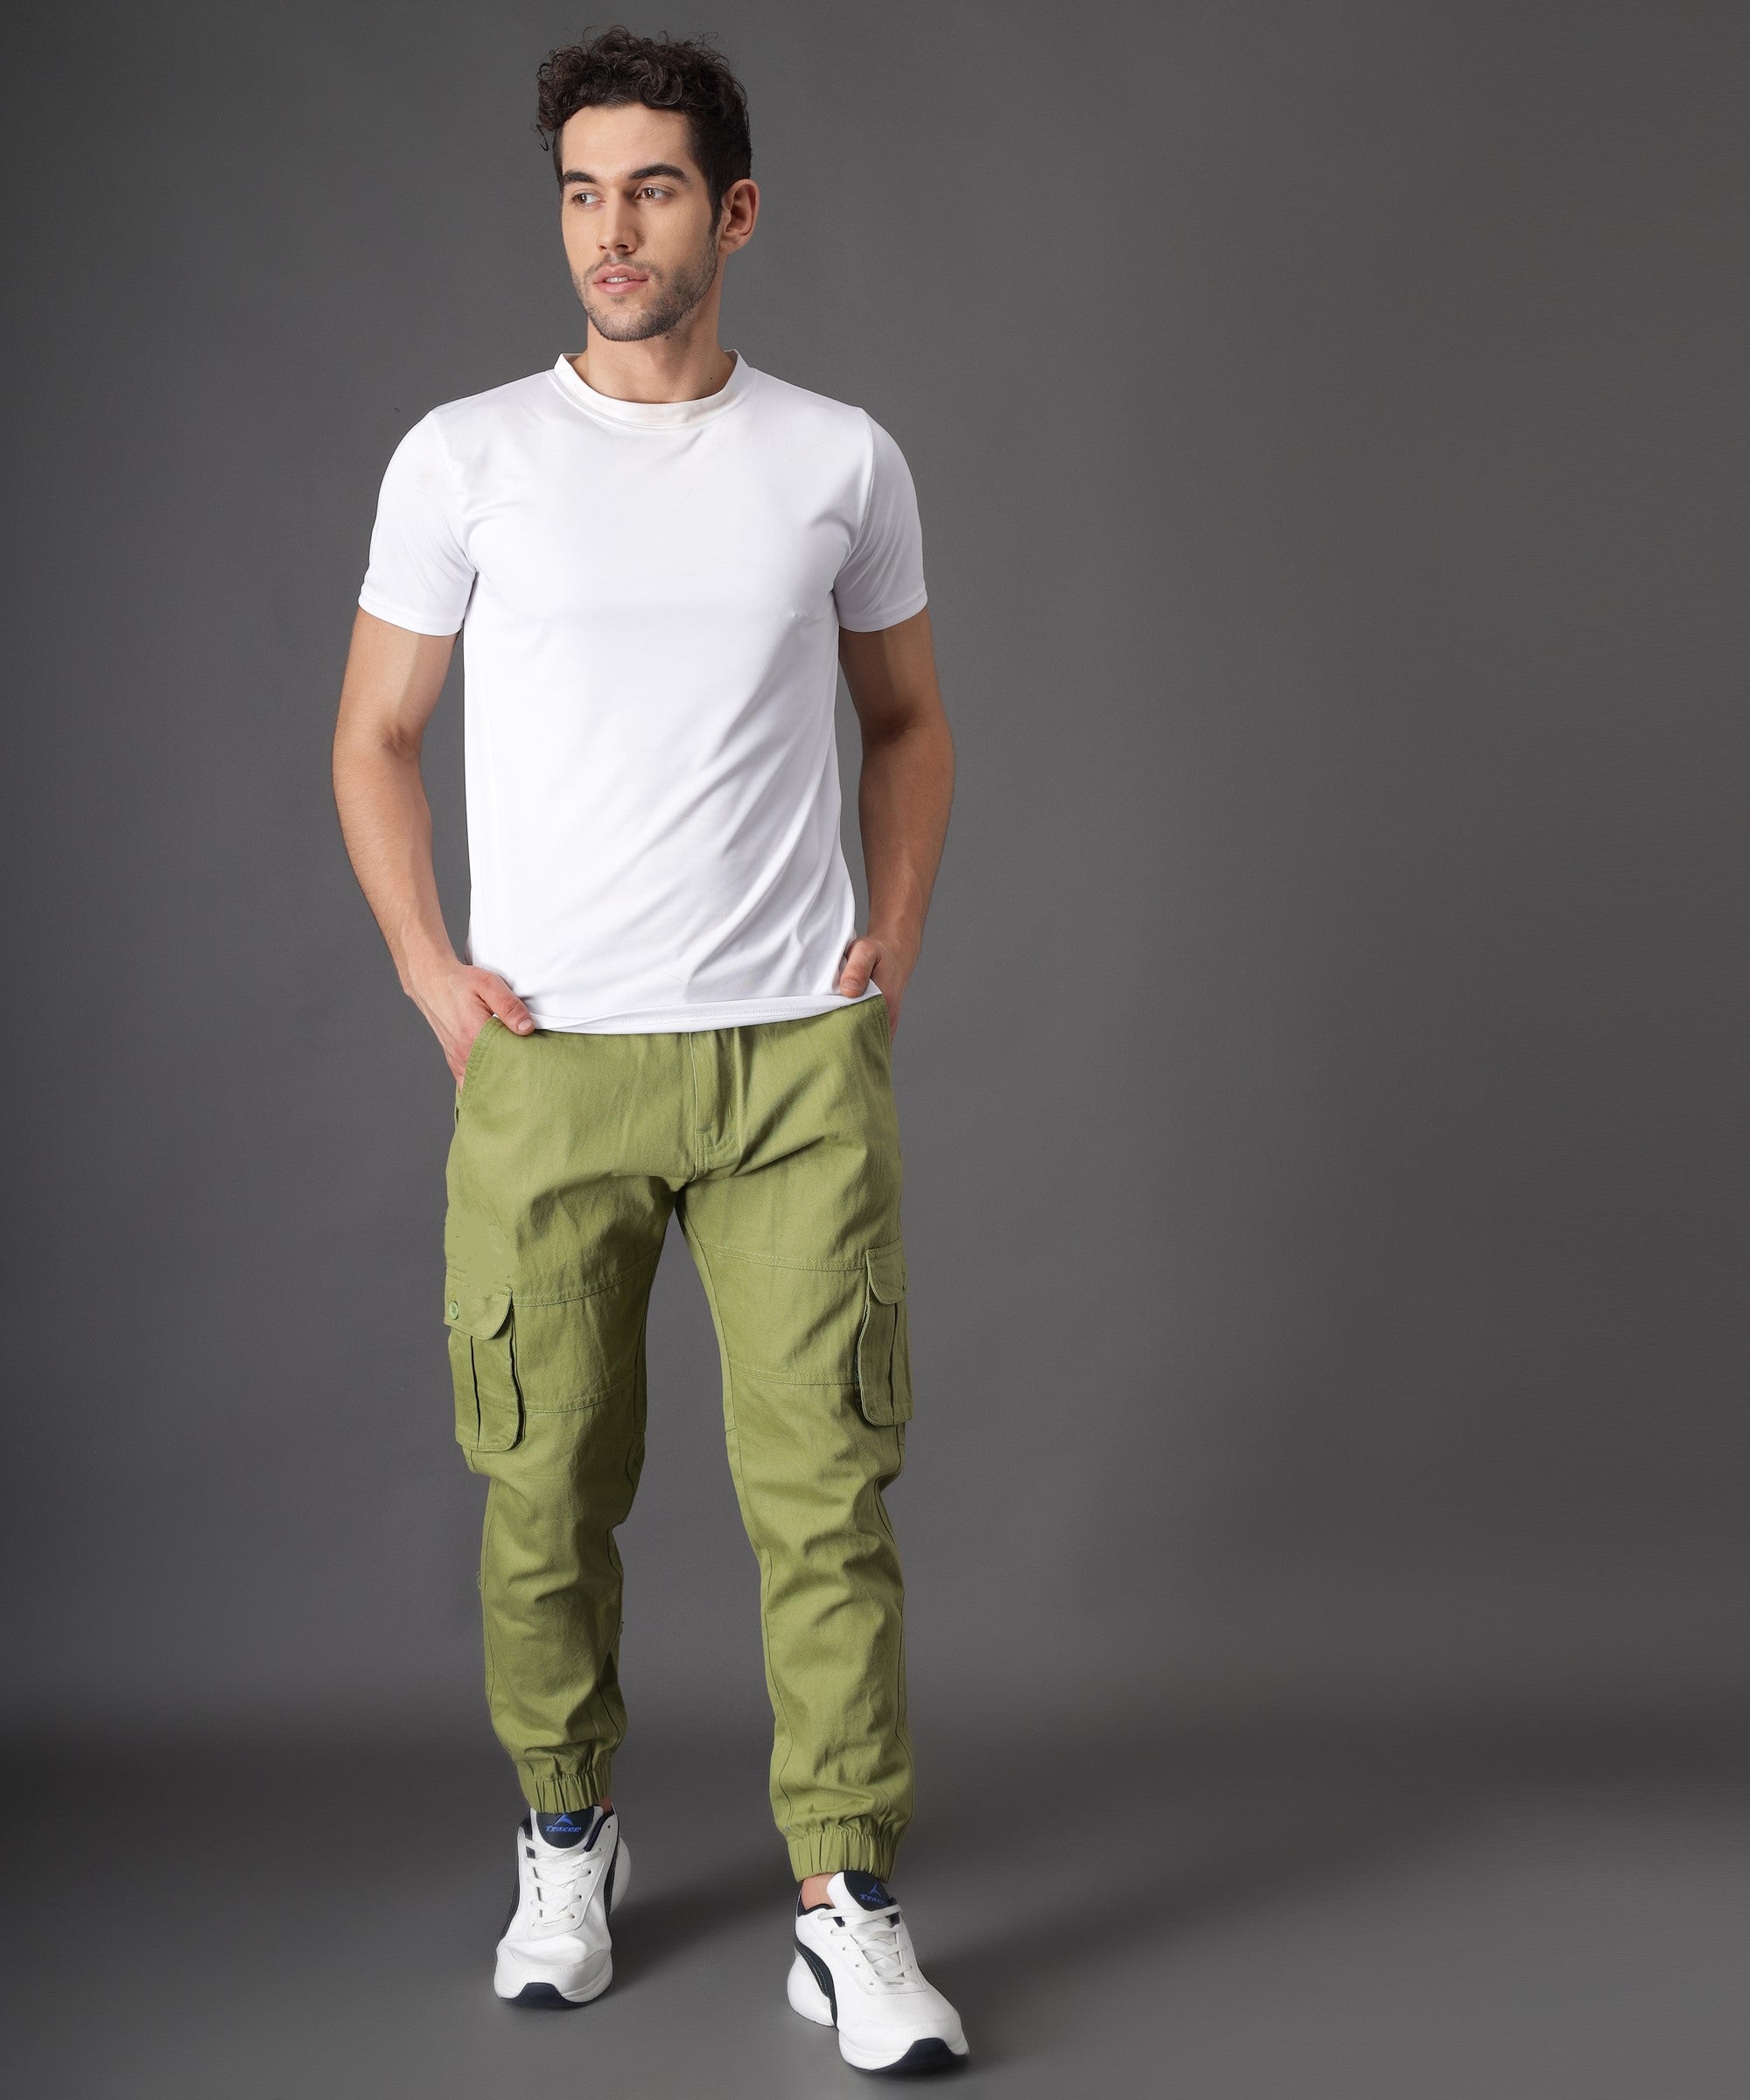 25 Amazing Cargo Pants Outfit Ideas For Men To Try This Year  Instaloverz